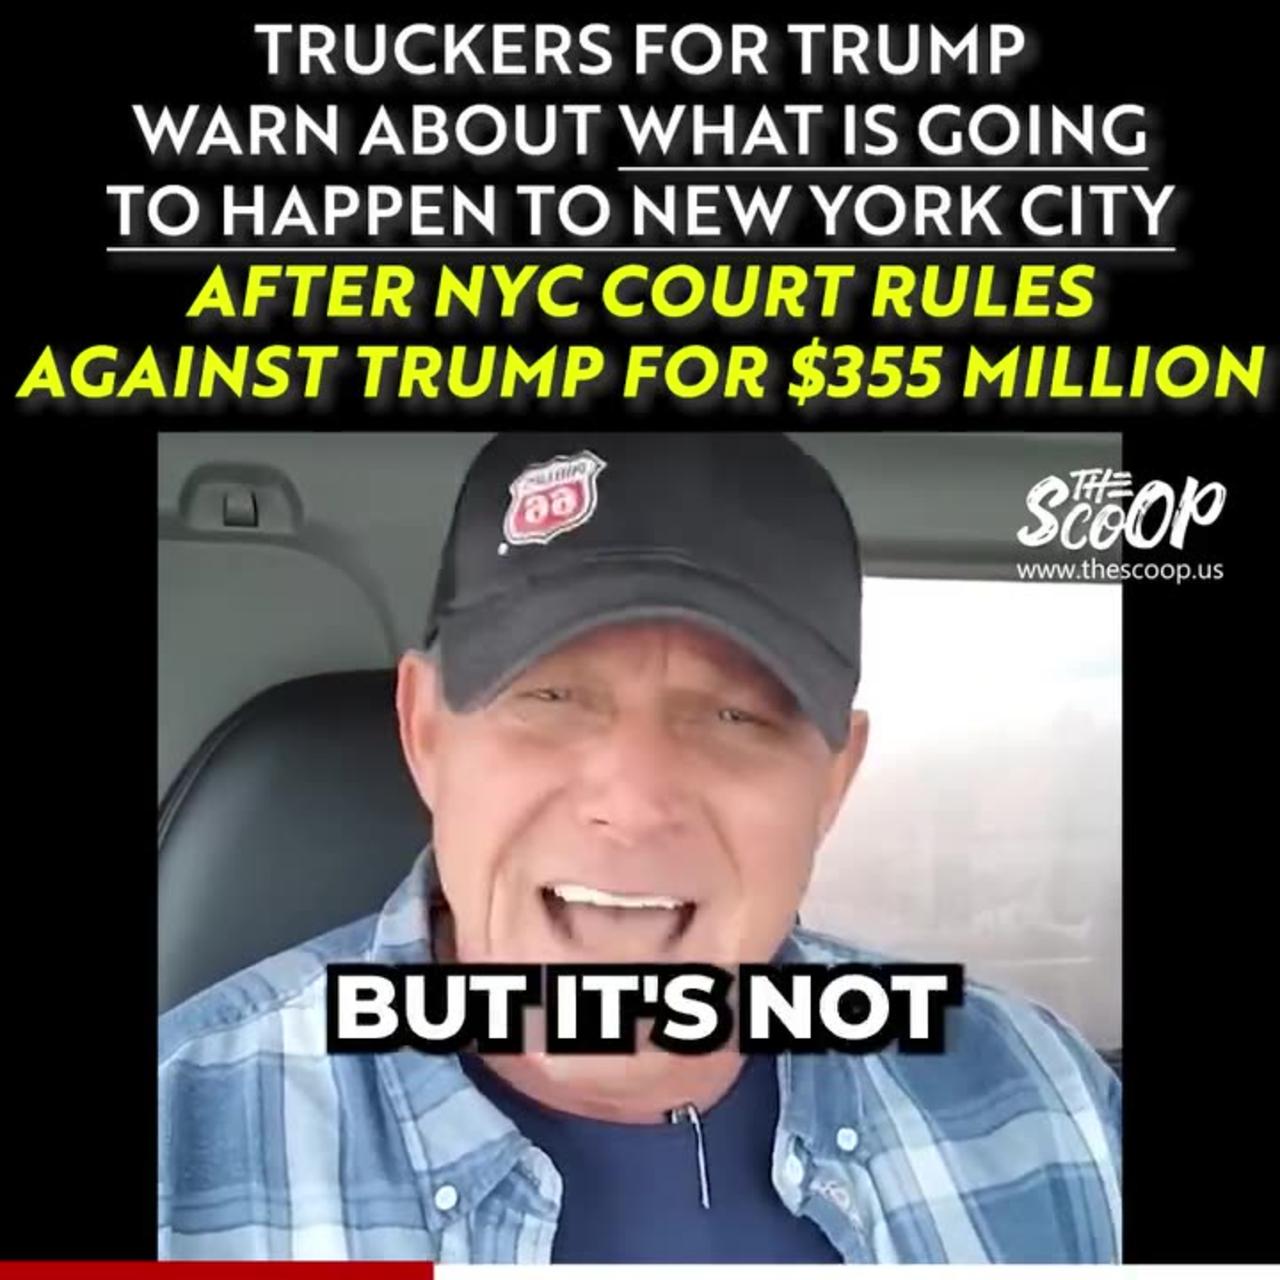 Truckers Issue Warning To NYC After Trump Ruling